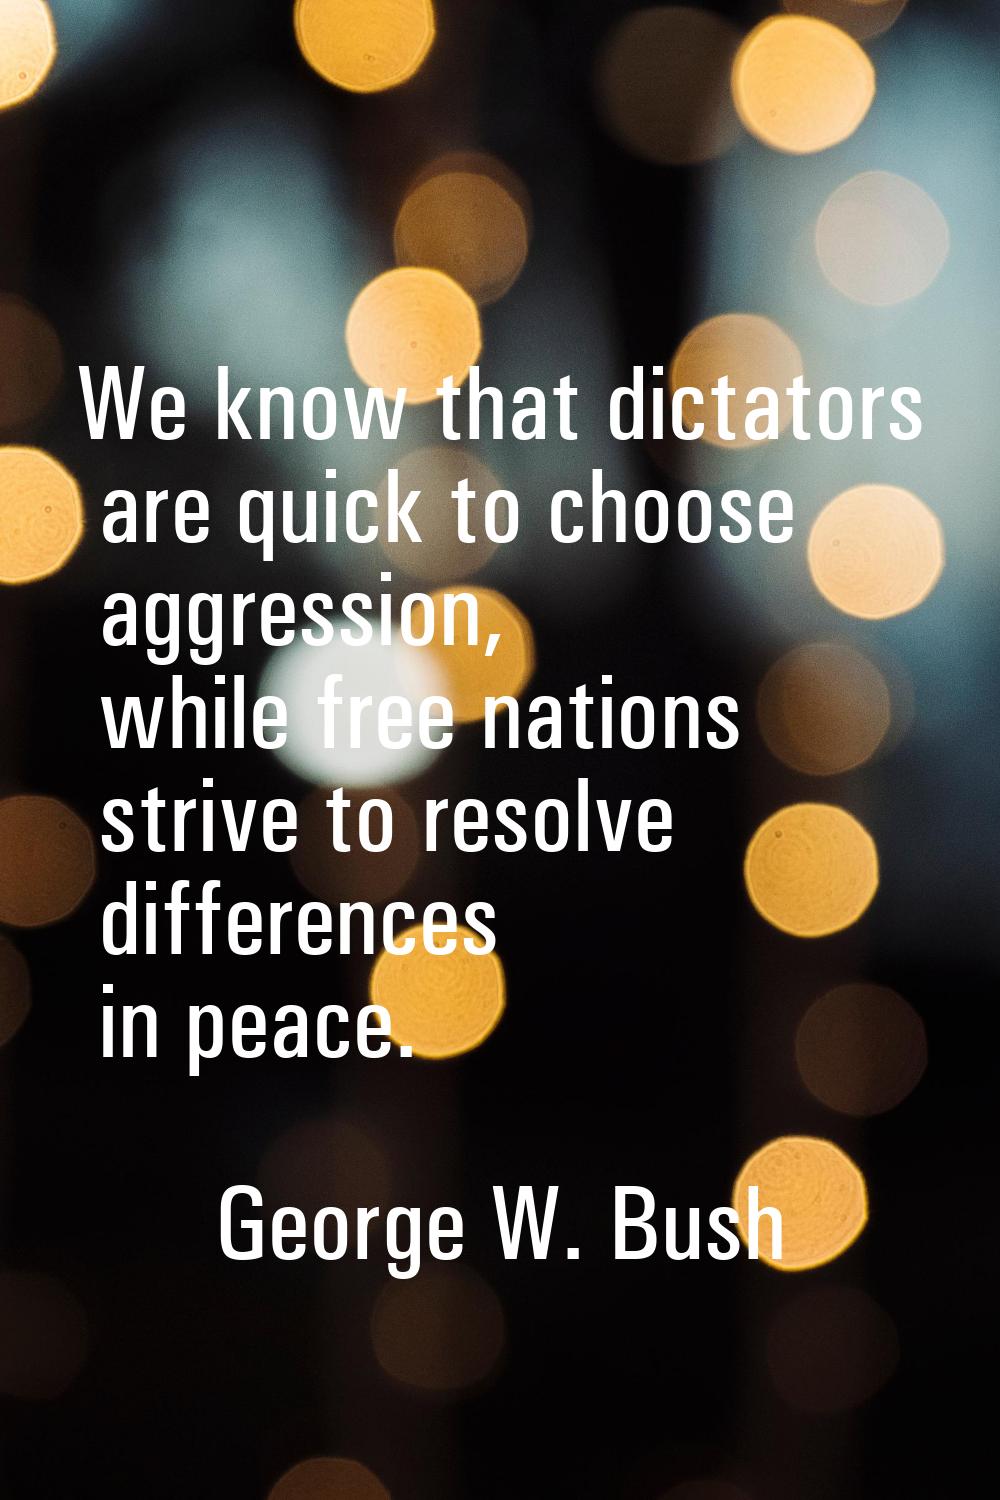 We know that dictators are quick to choose aggression, while free nations strive to resolve differe